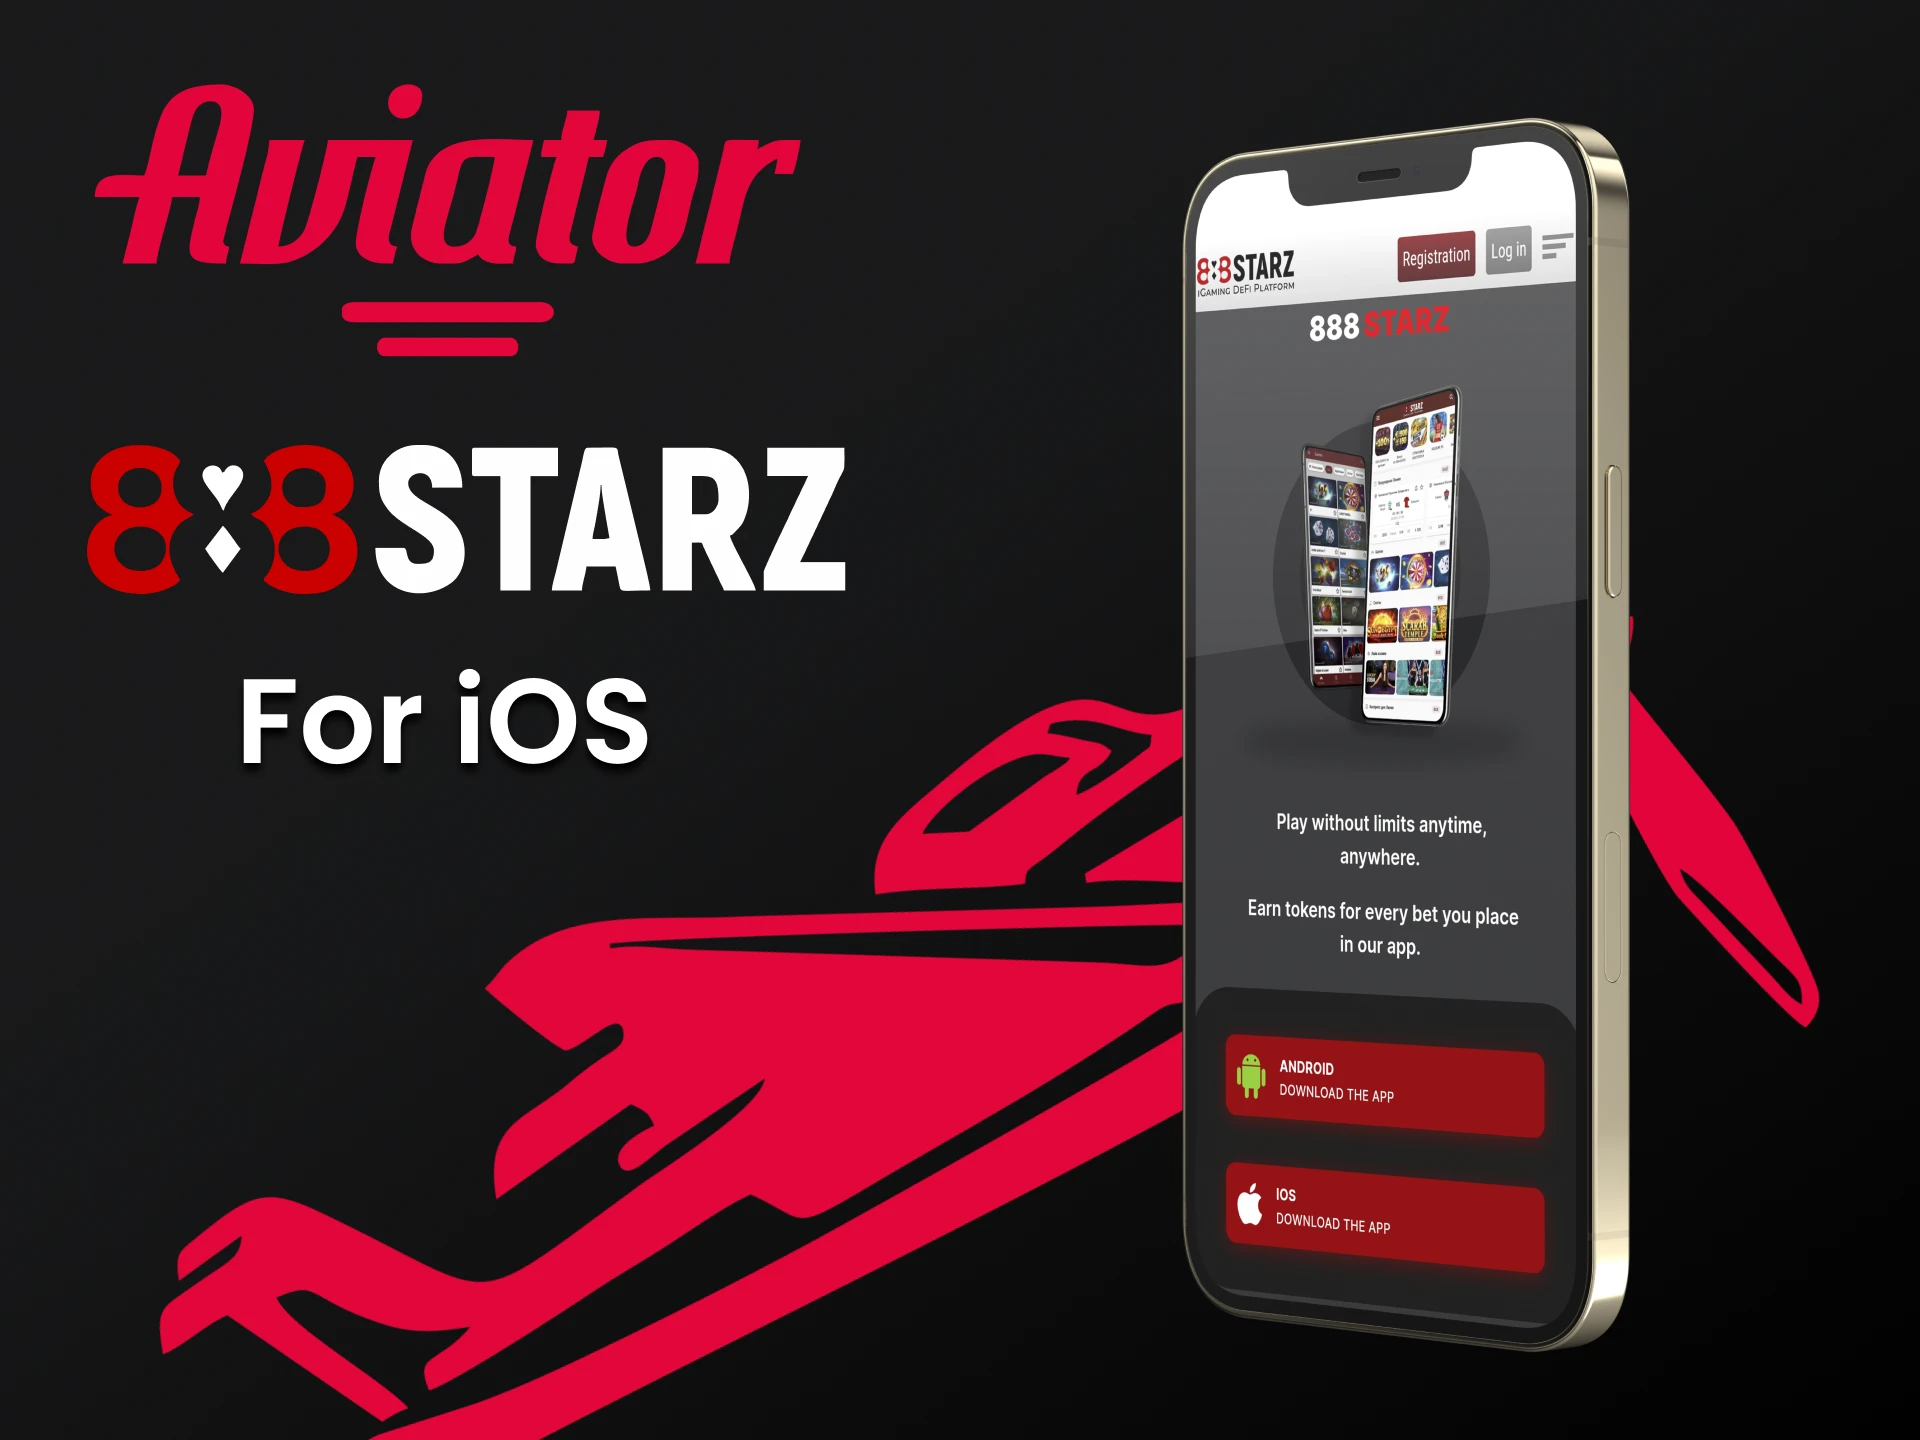 Download the 888starz app for iOS to play Aviator.